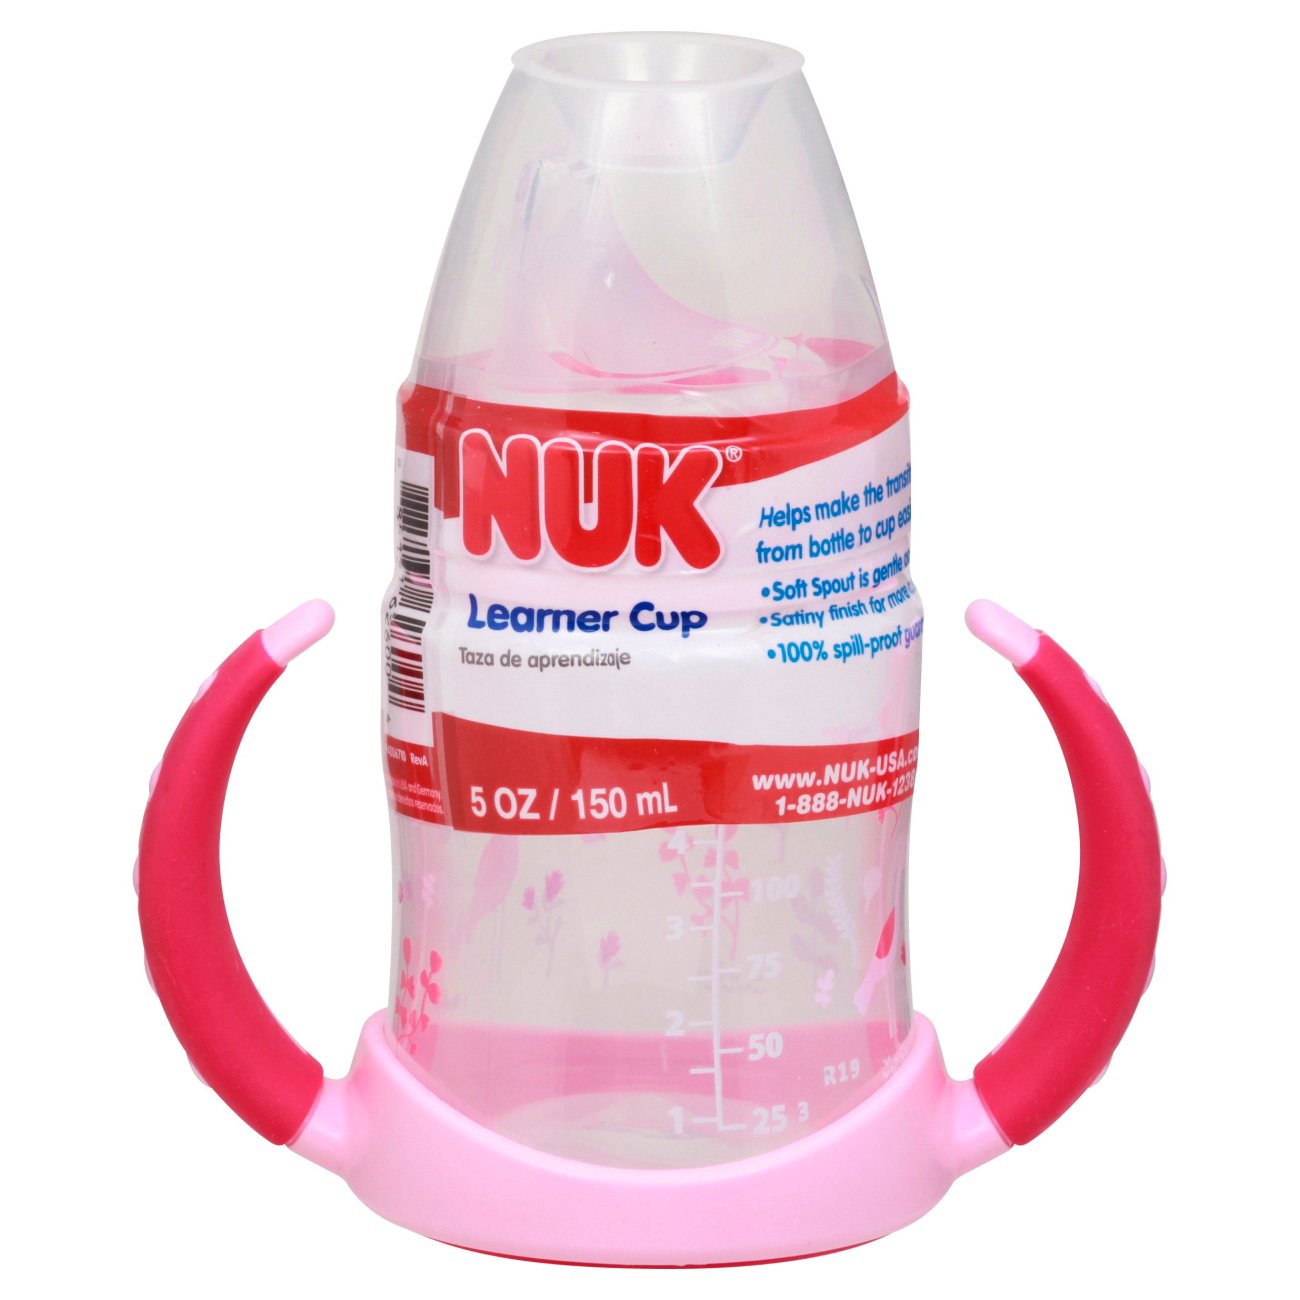 Nuk Tie Dye Learner Cup Assorted Shop Feeding At H E B